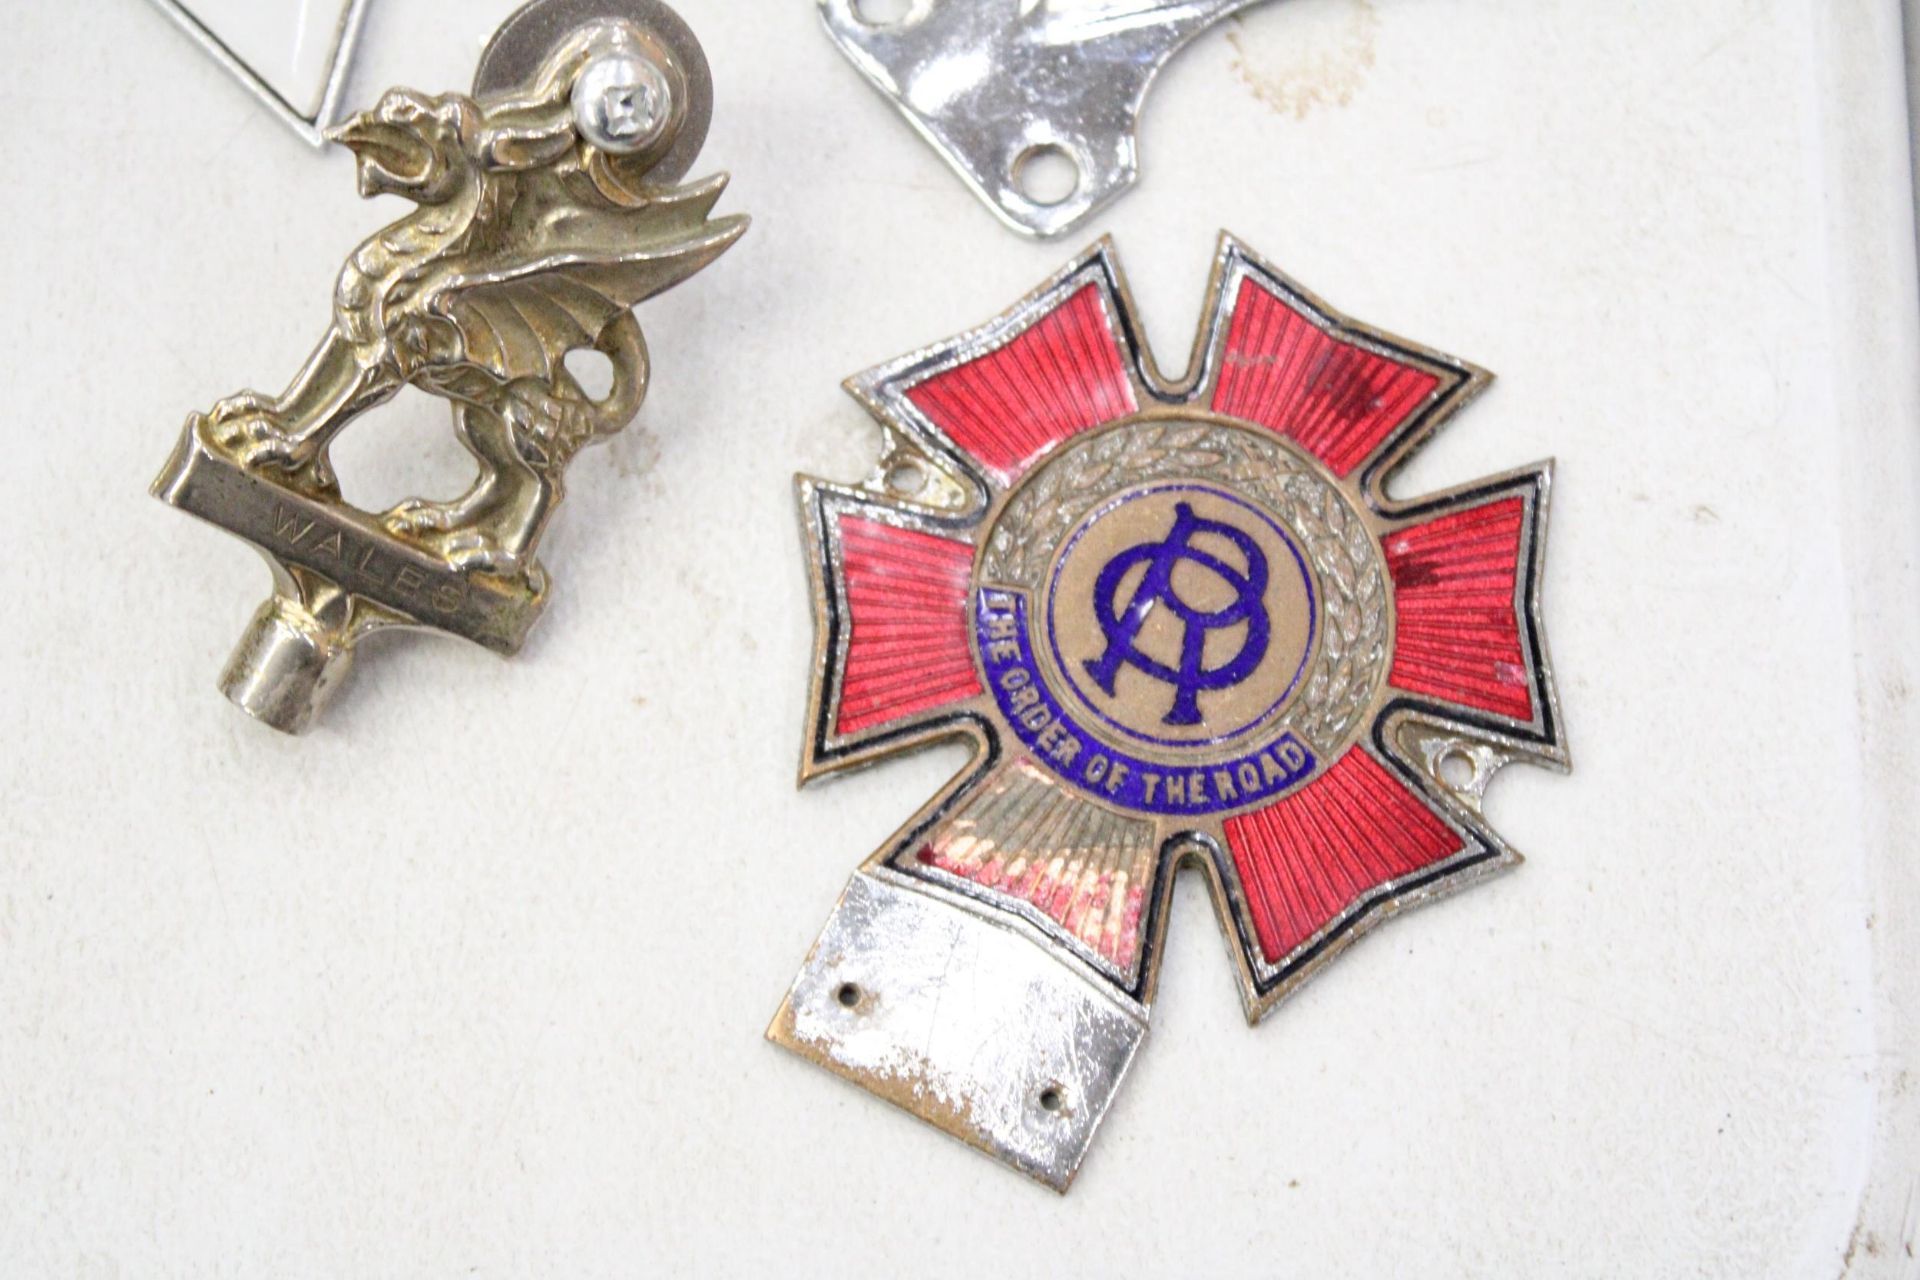 A QUANTITY OF VINTAGE CAR BADGES TO INCLUDE THE AA, VETERAN MOTORISTS ASSOCIATION CAR CLUB BADGES - Image 4 of 5